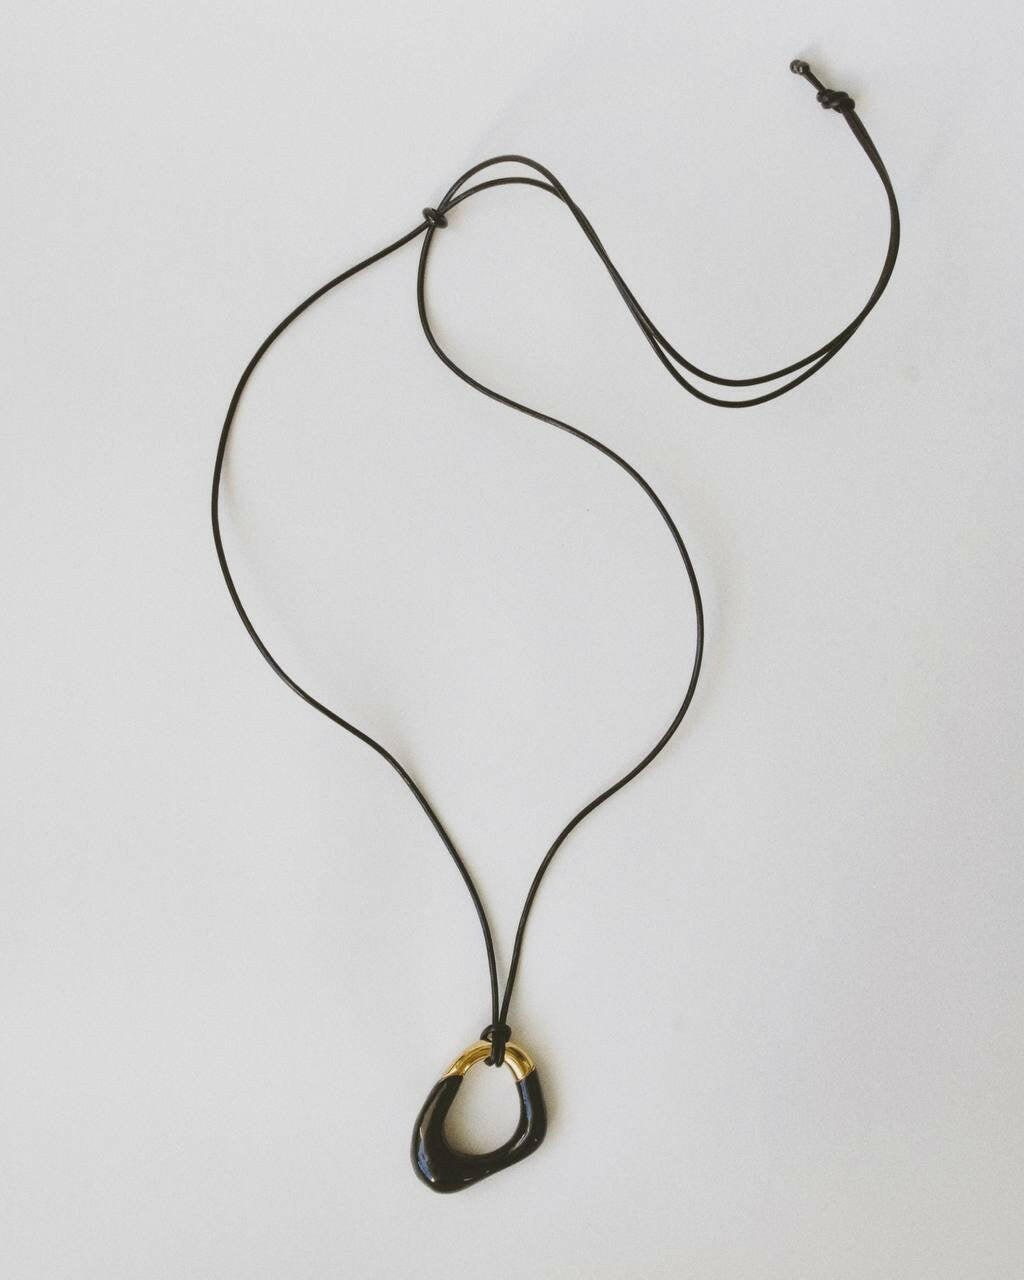 Momentum Necklace in black and gold by Enso Design Lab, displayed flat with a vegan leather cord. The pendant's unique, liquid-inspired design is highlighted with enamel and gold plating.